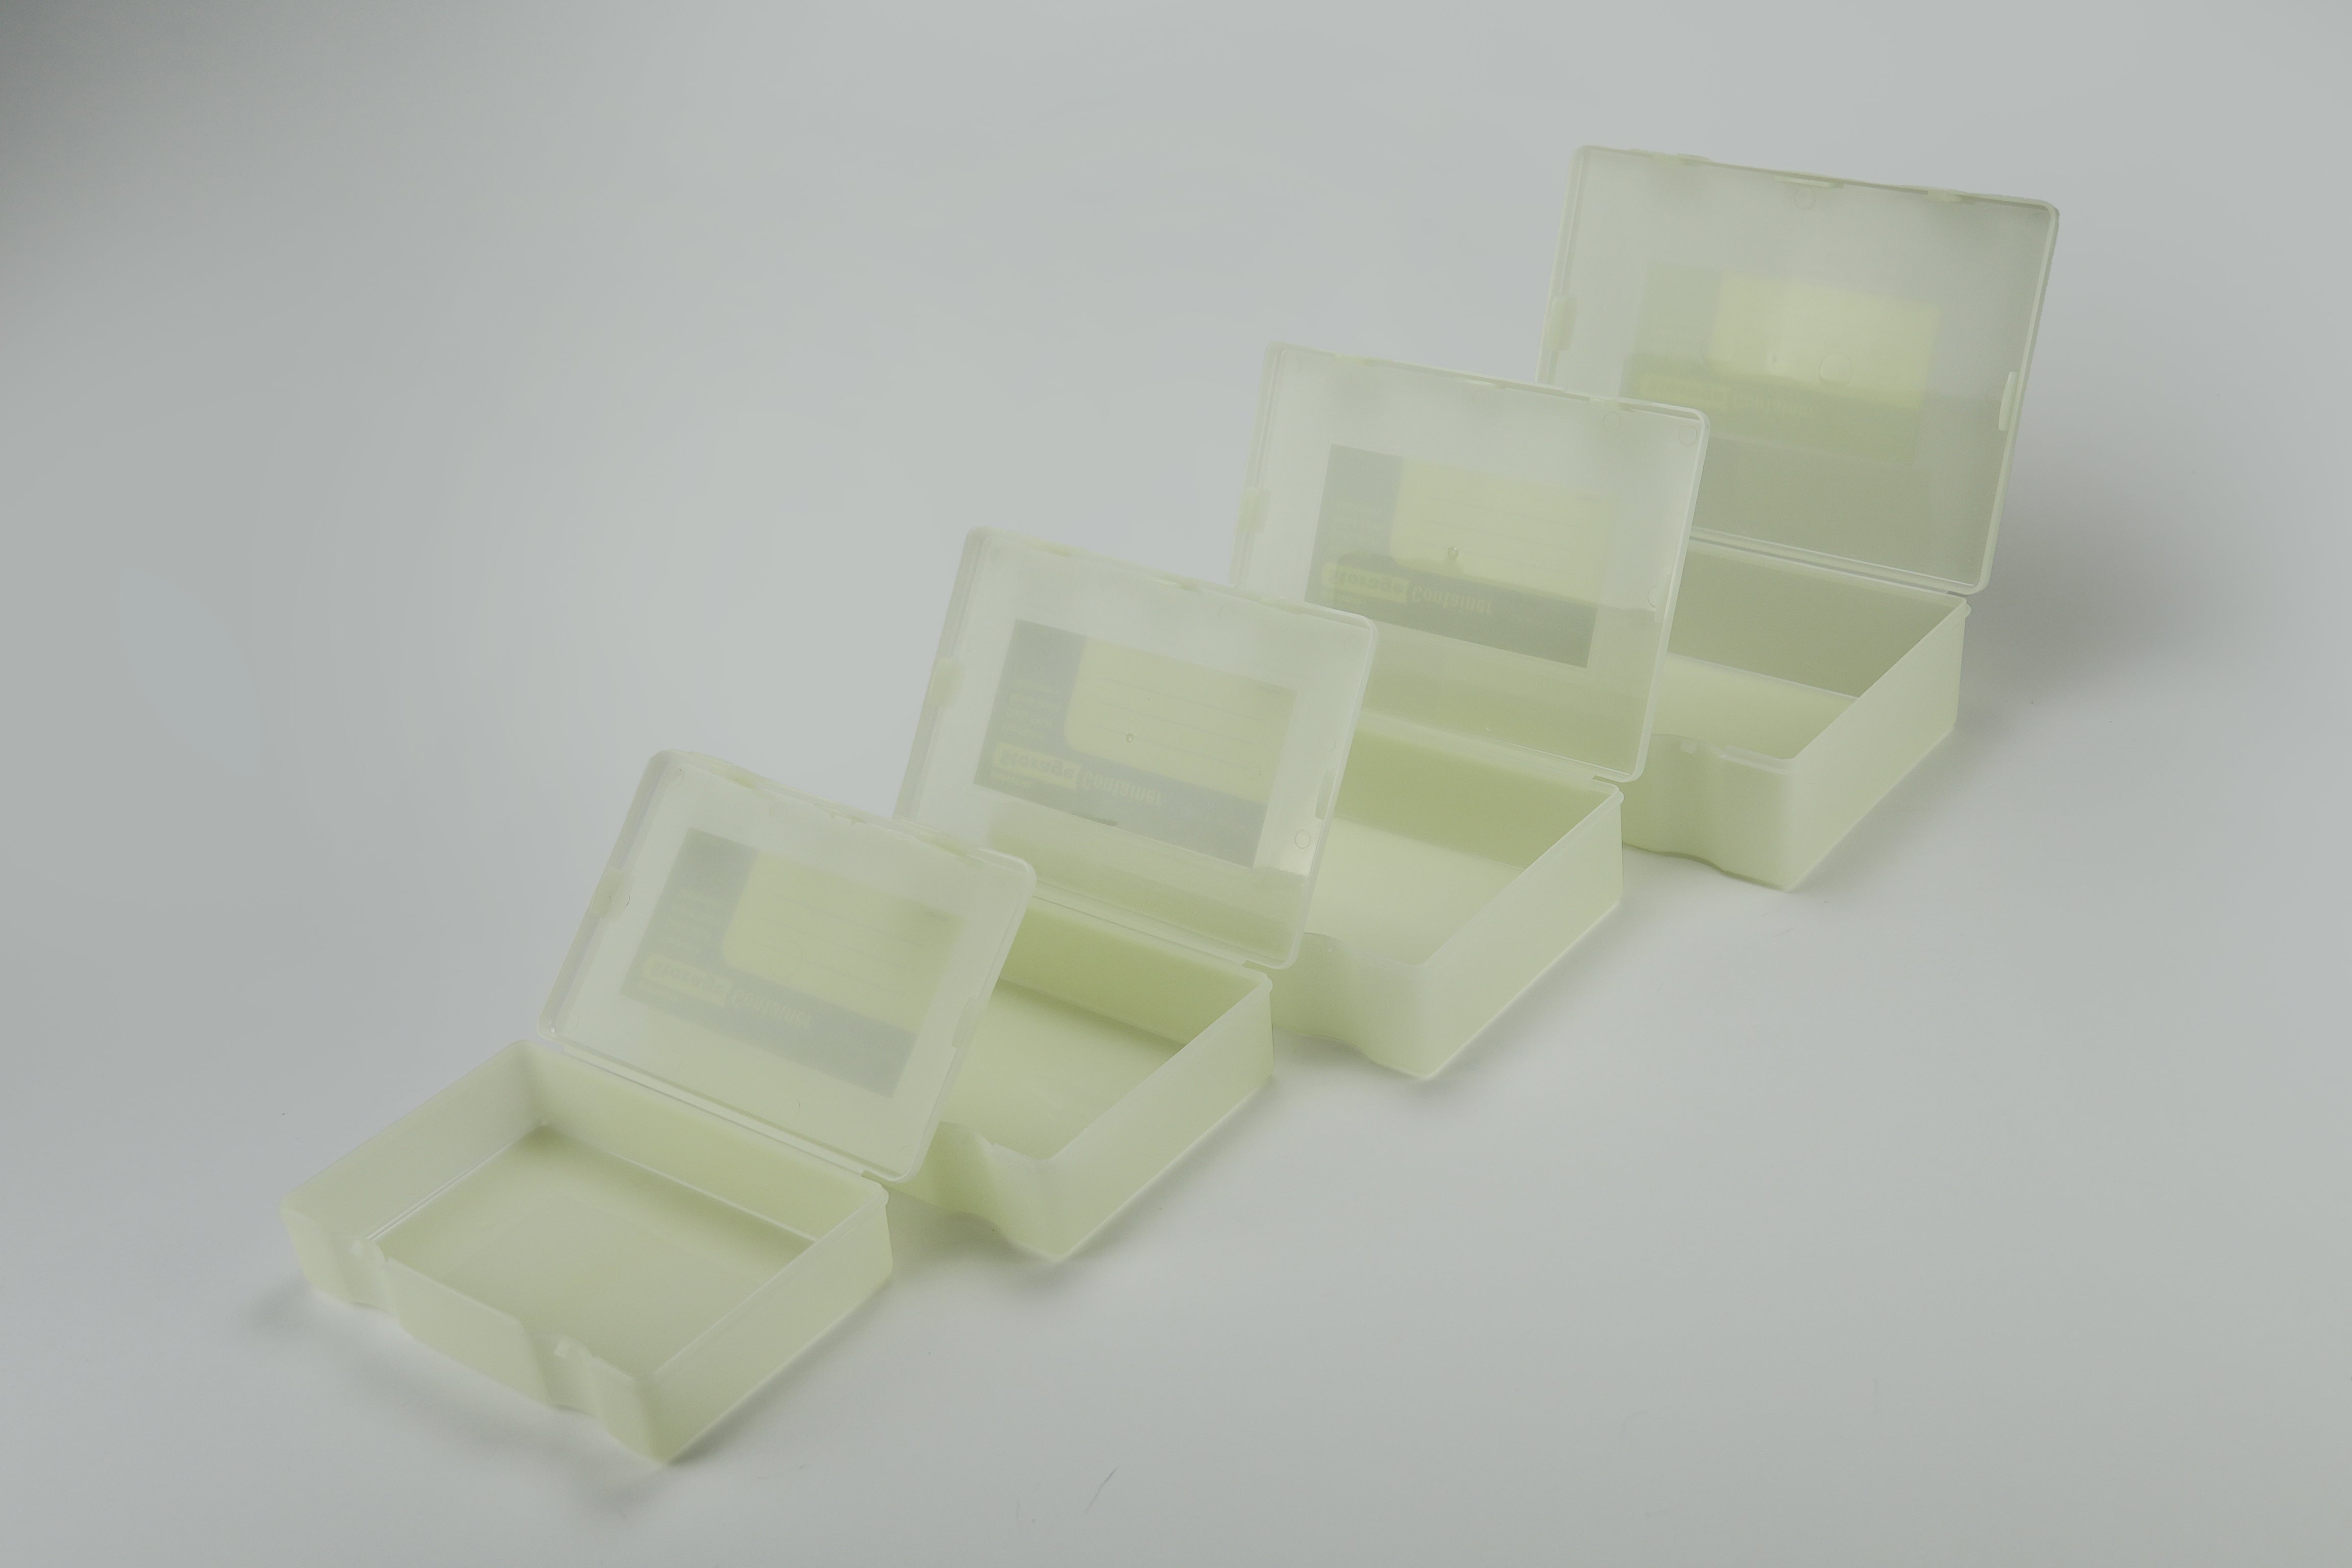 Nested Glow-In-The-Dark Storage Containers